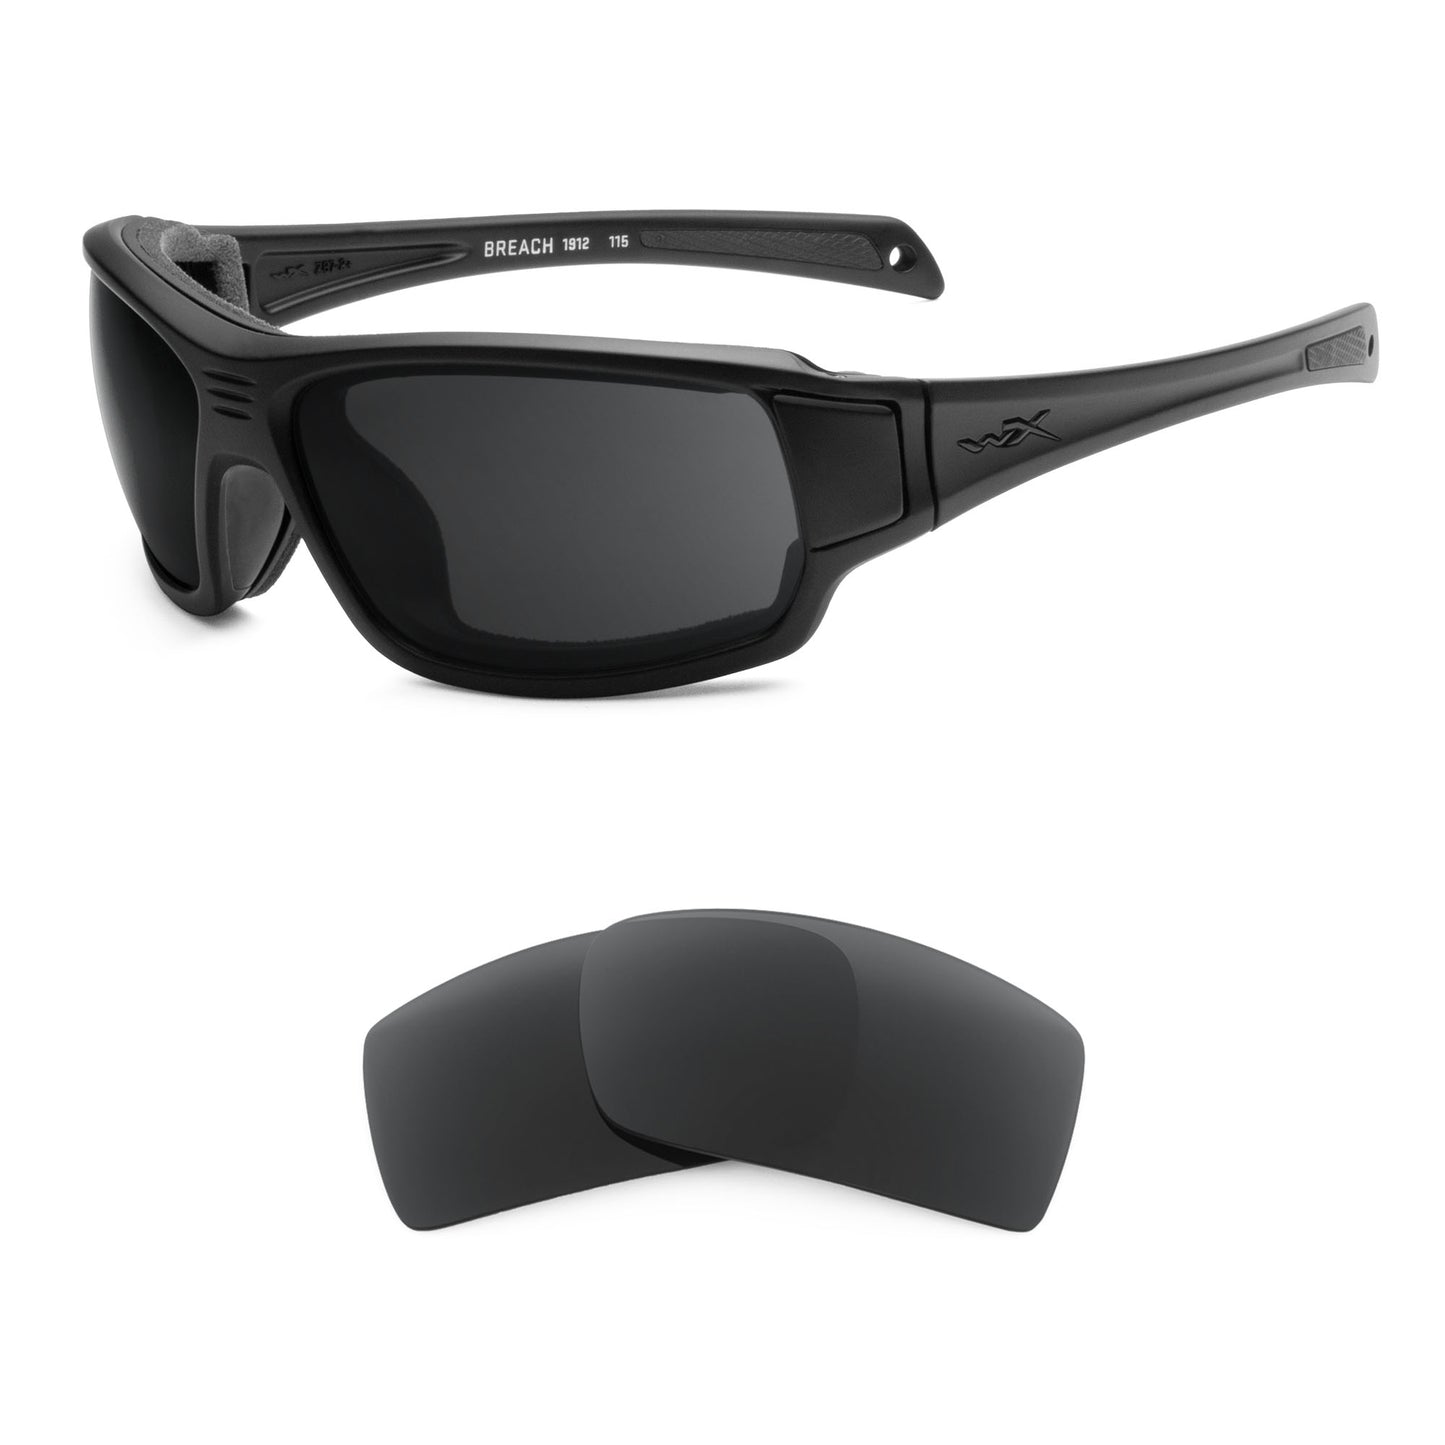 Wiley X Breach sunglasses with replacement lenses